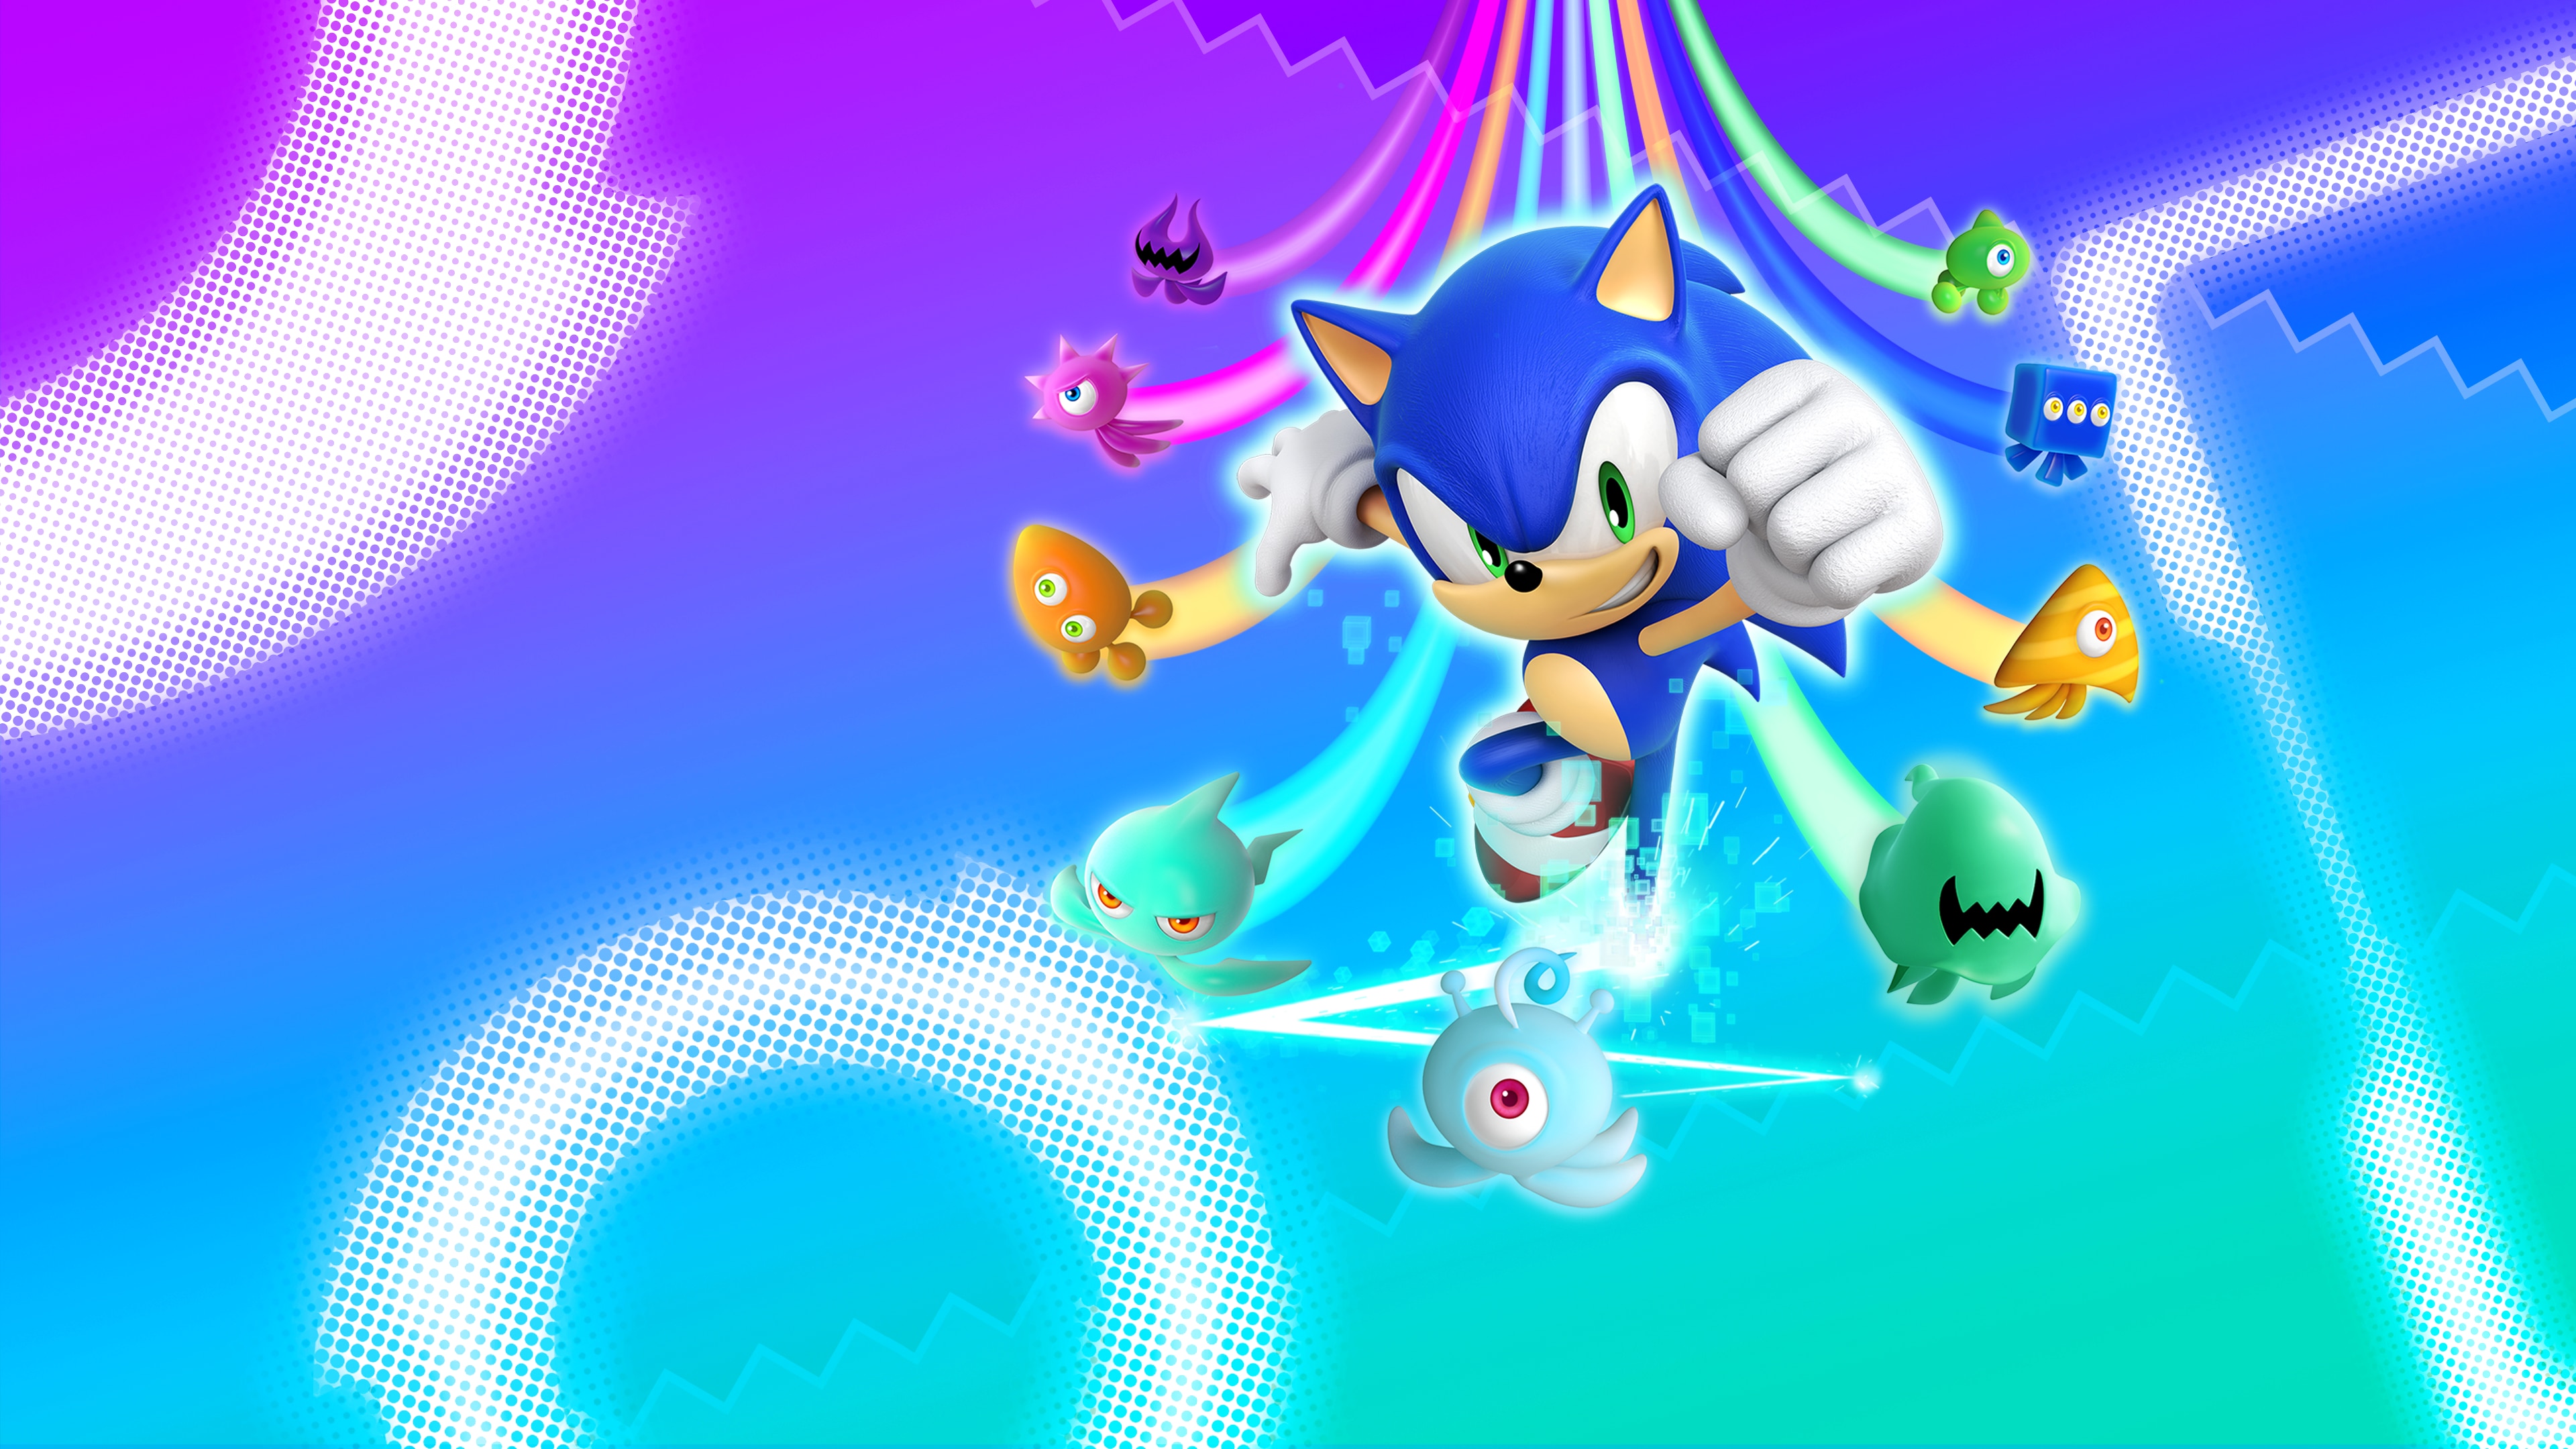 Download Hyper Sonic Colorful Background Wallpaper